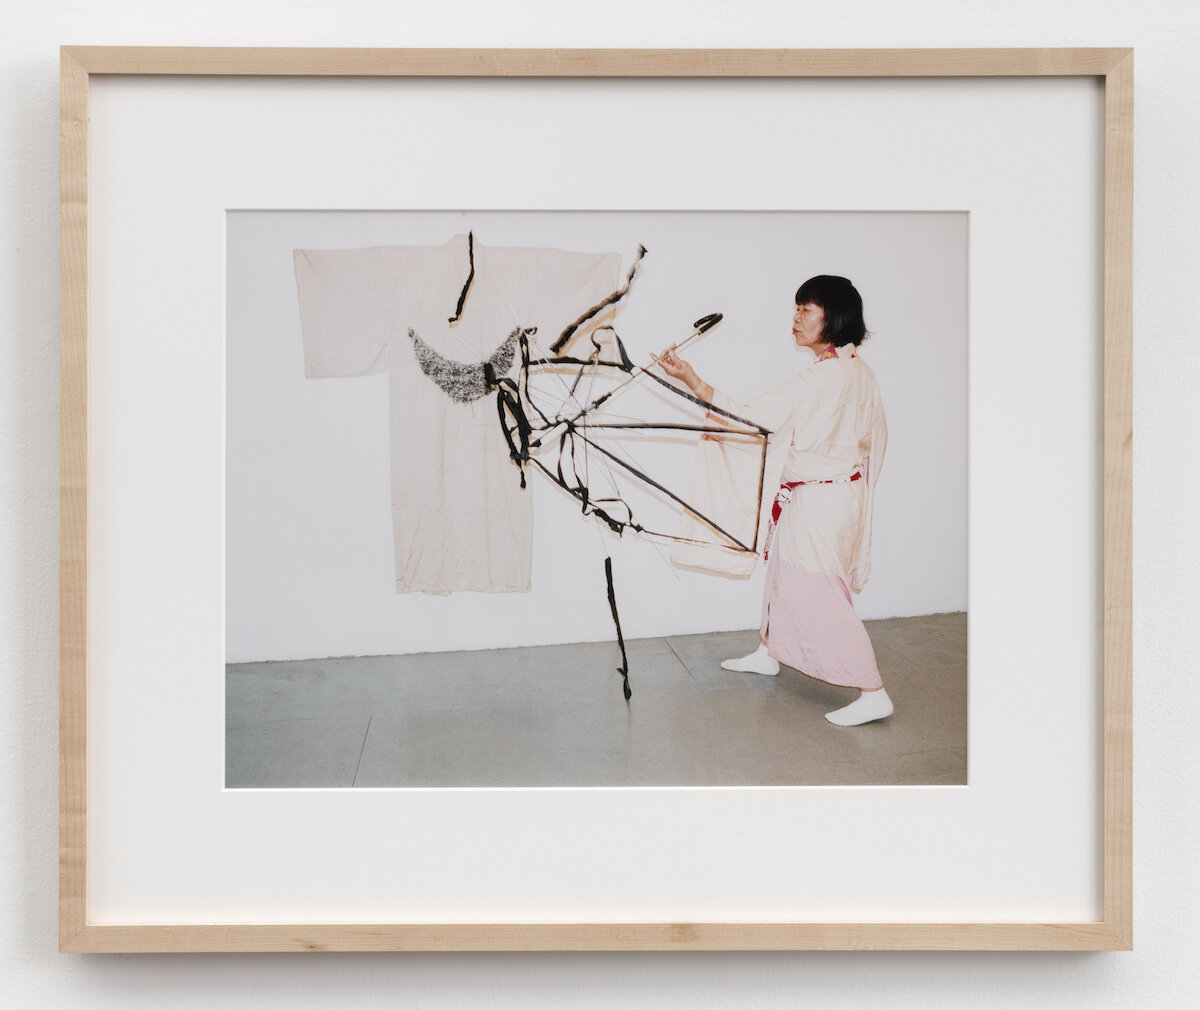   Umbrella Dance (dedicated to Leon Golub),  2004, Framed photograph, 11 x 14 in, Image courtesy of the Sol LeWitt Collection, Photo: Adam Reich 